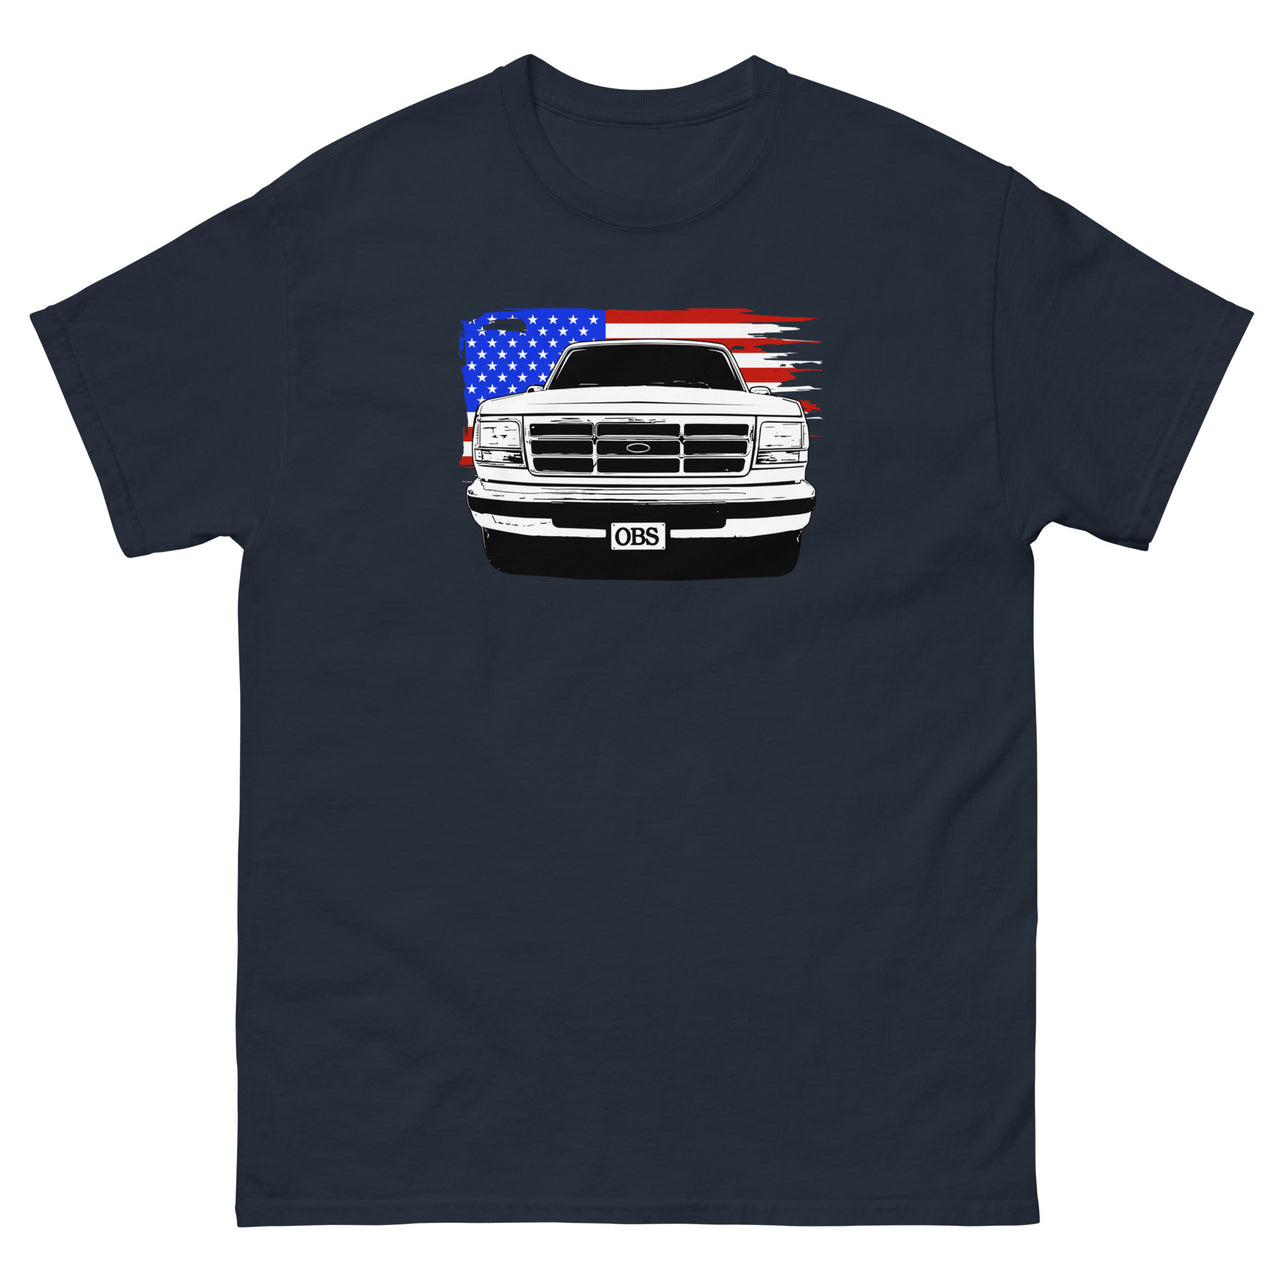 OBS Truck American Flag T-Shirt in navy